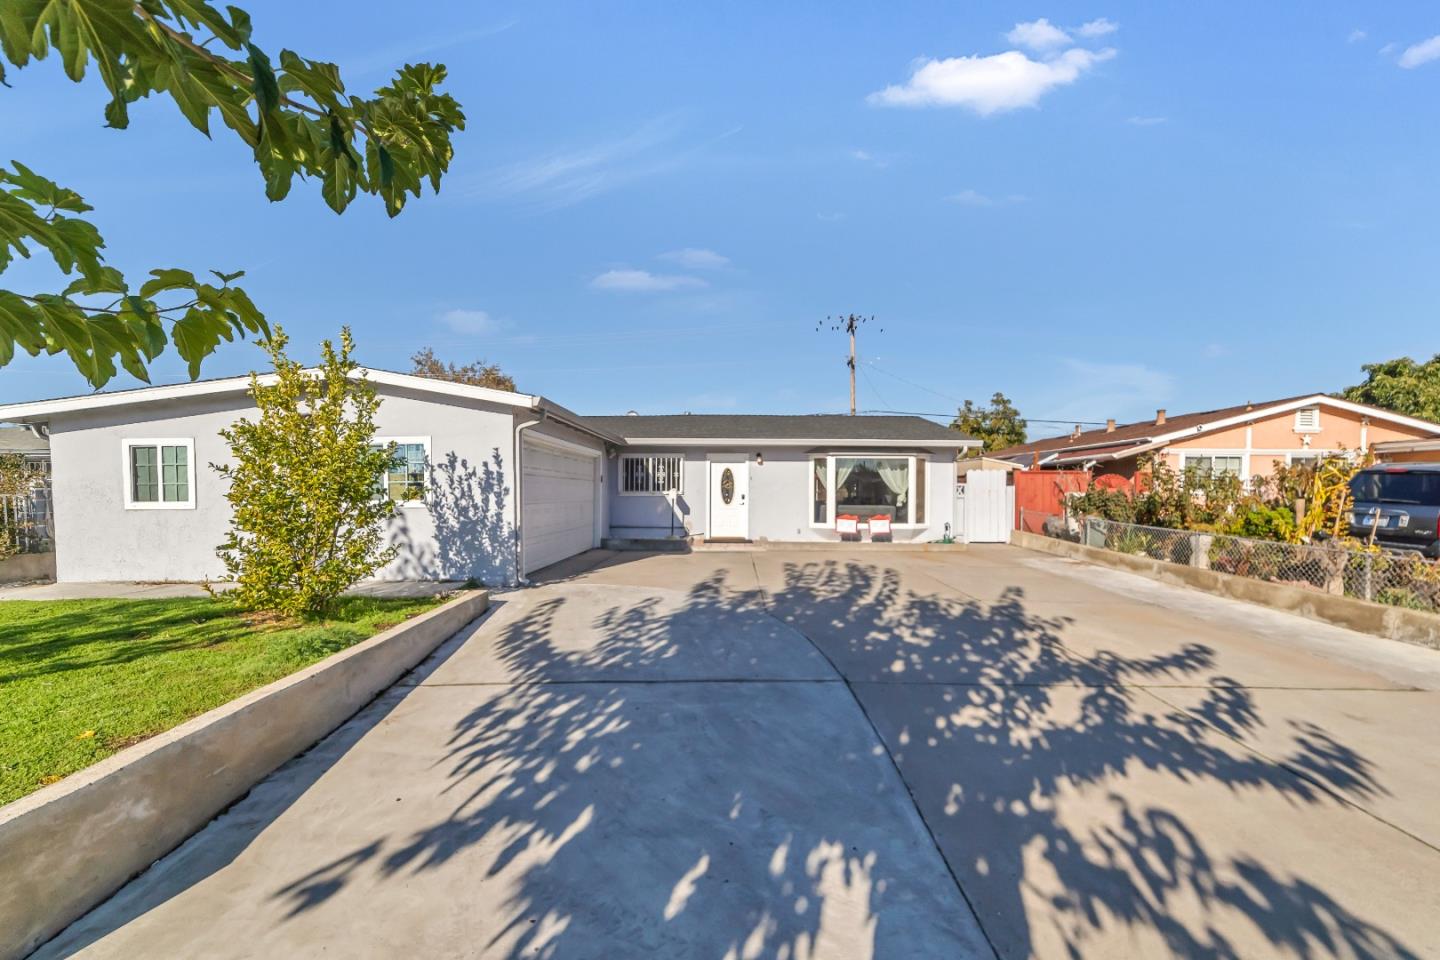 Photo of 2067 Evelyn Ave in San Jose, CA